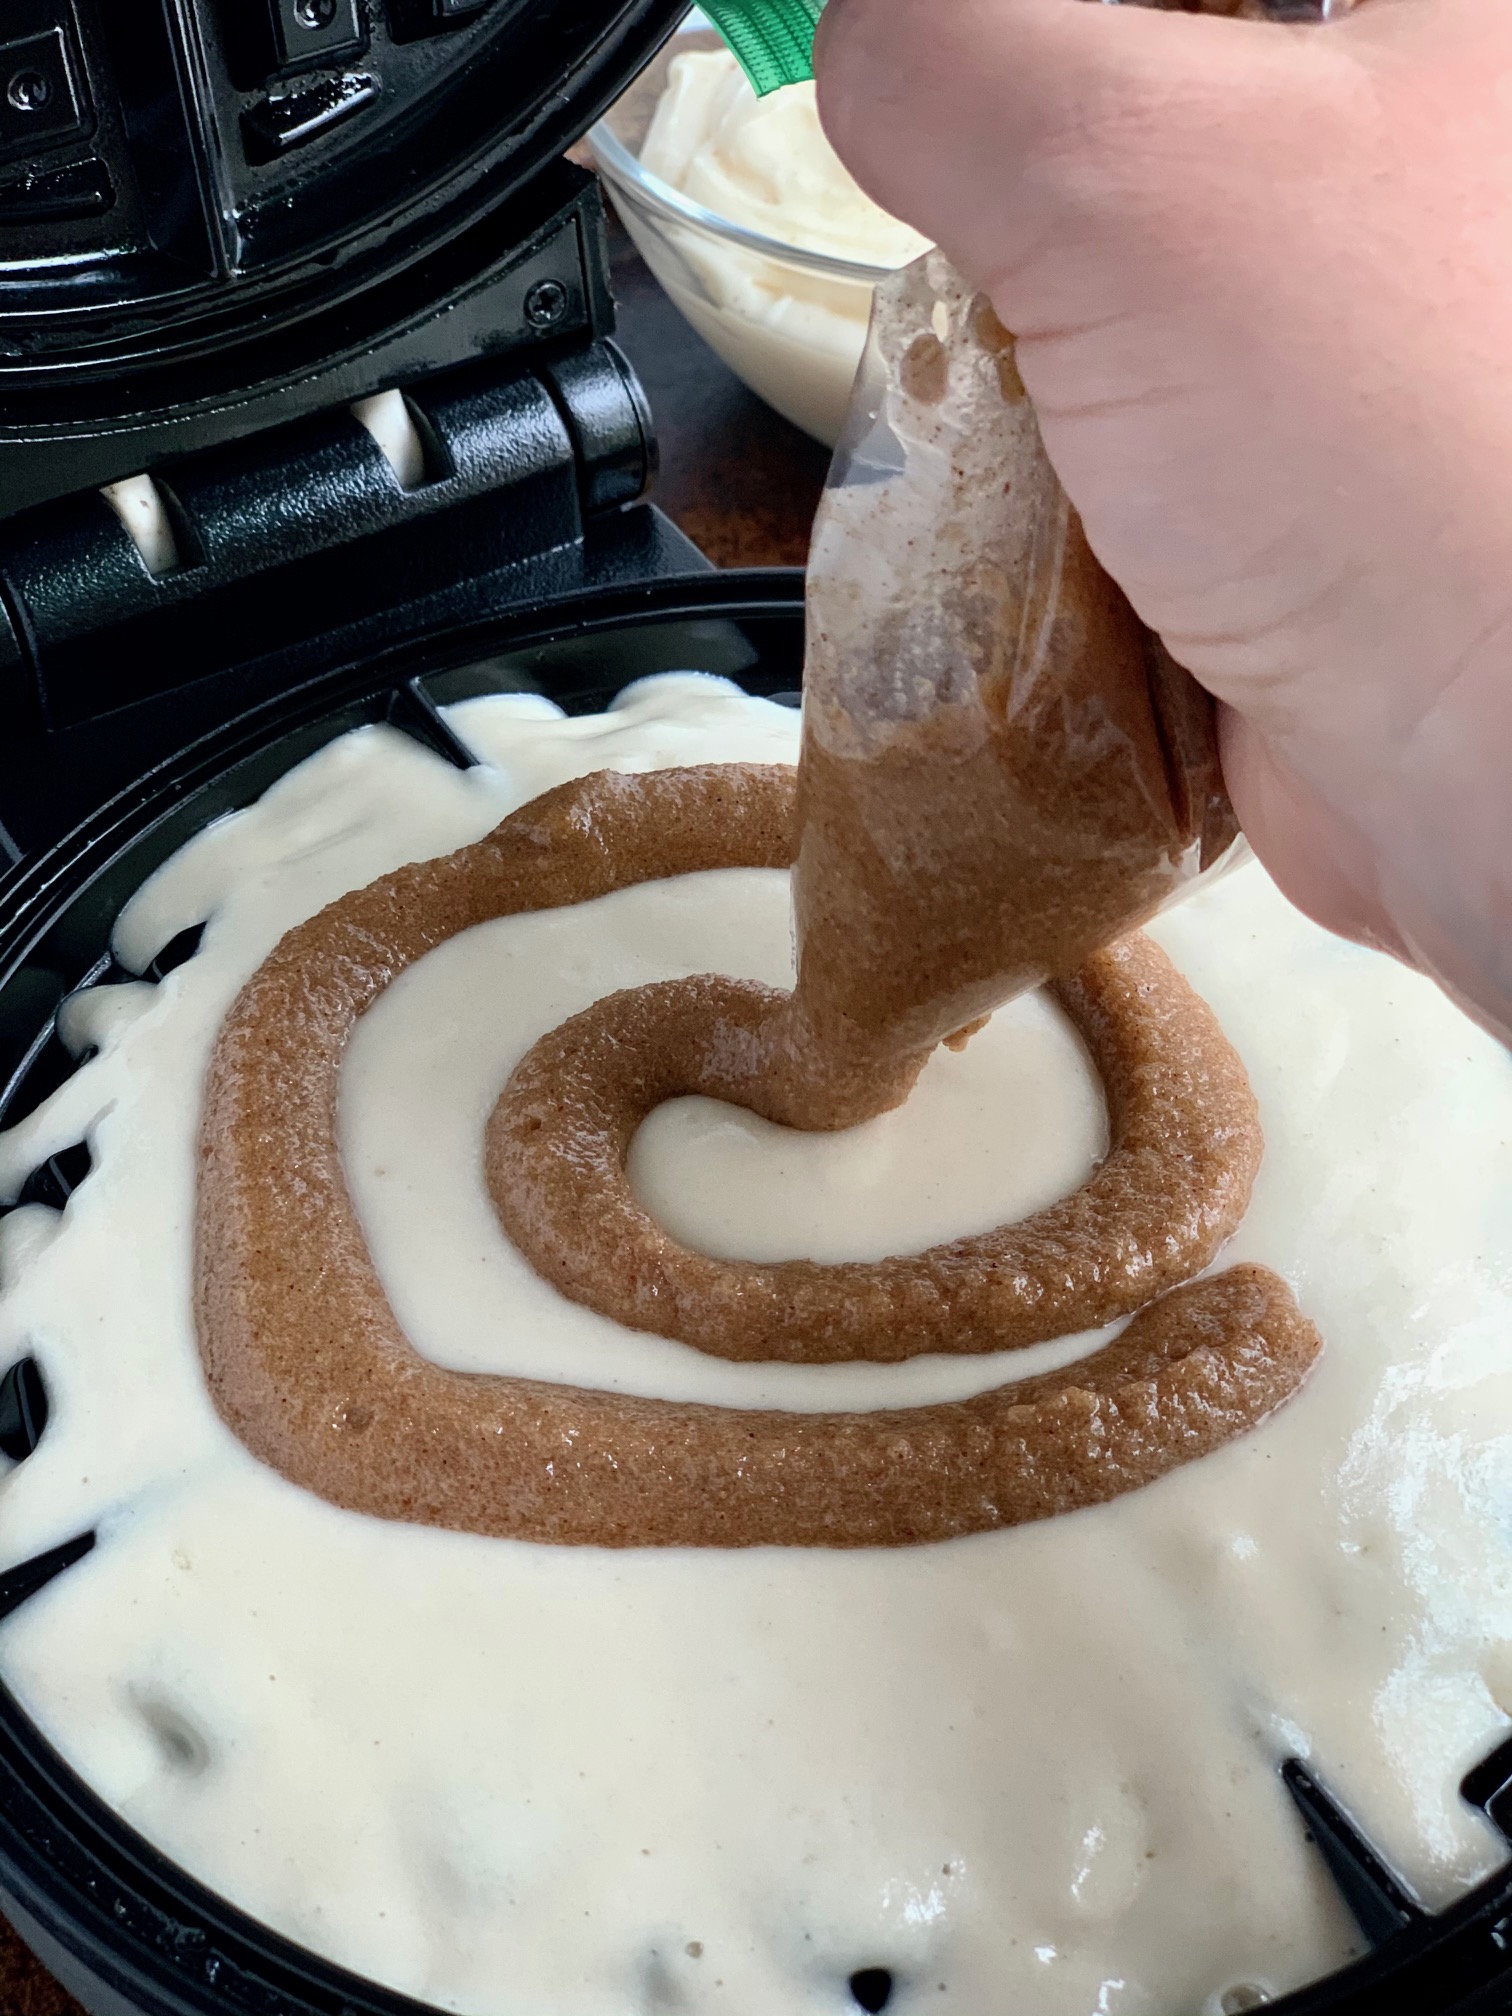 A waffle maker with waffle mix on it. A hand is piping a cinnamon swirl mixture from a zip lock bag onto the waffle mix.